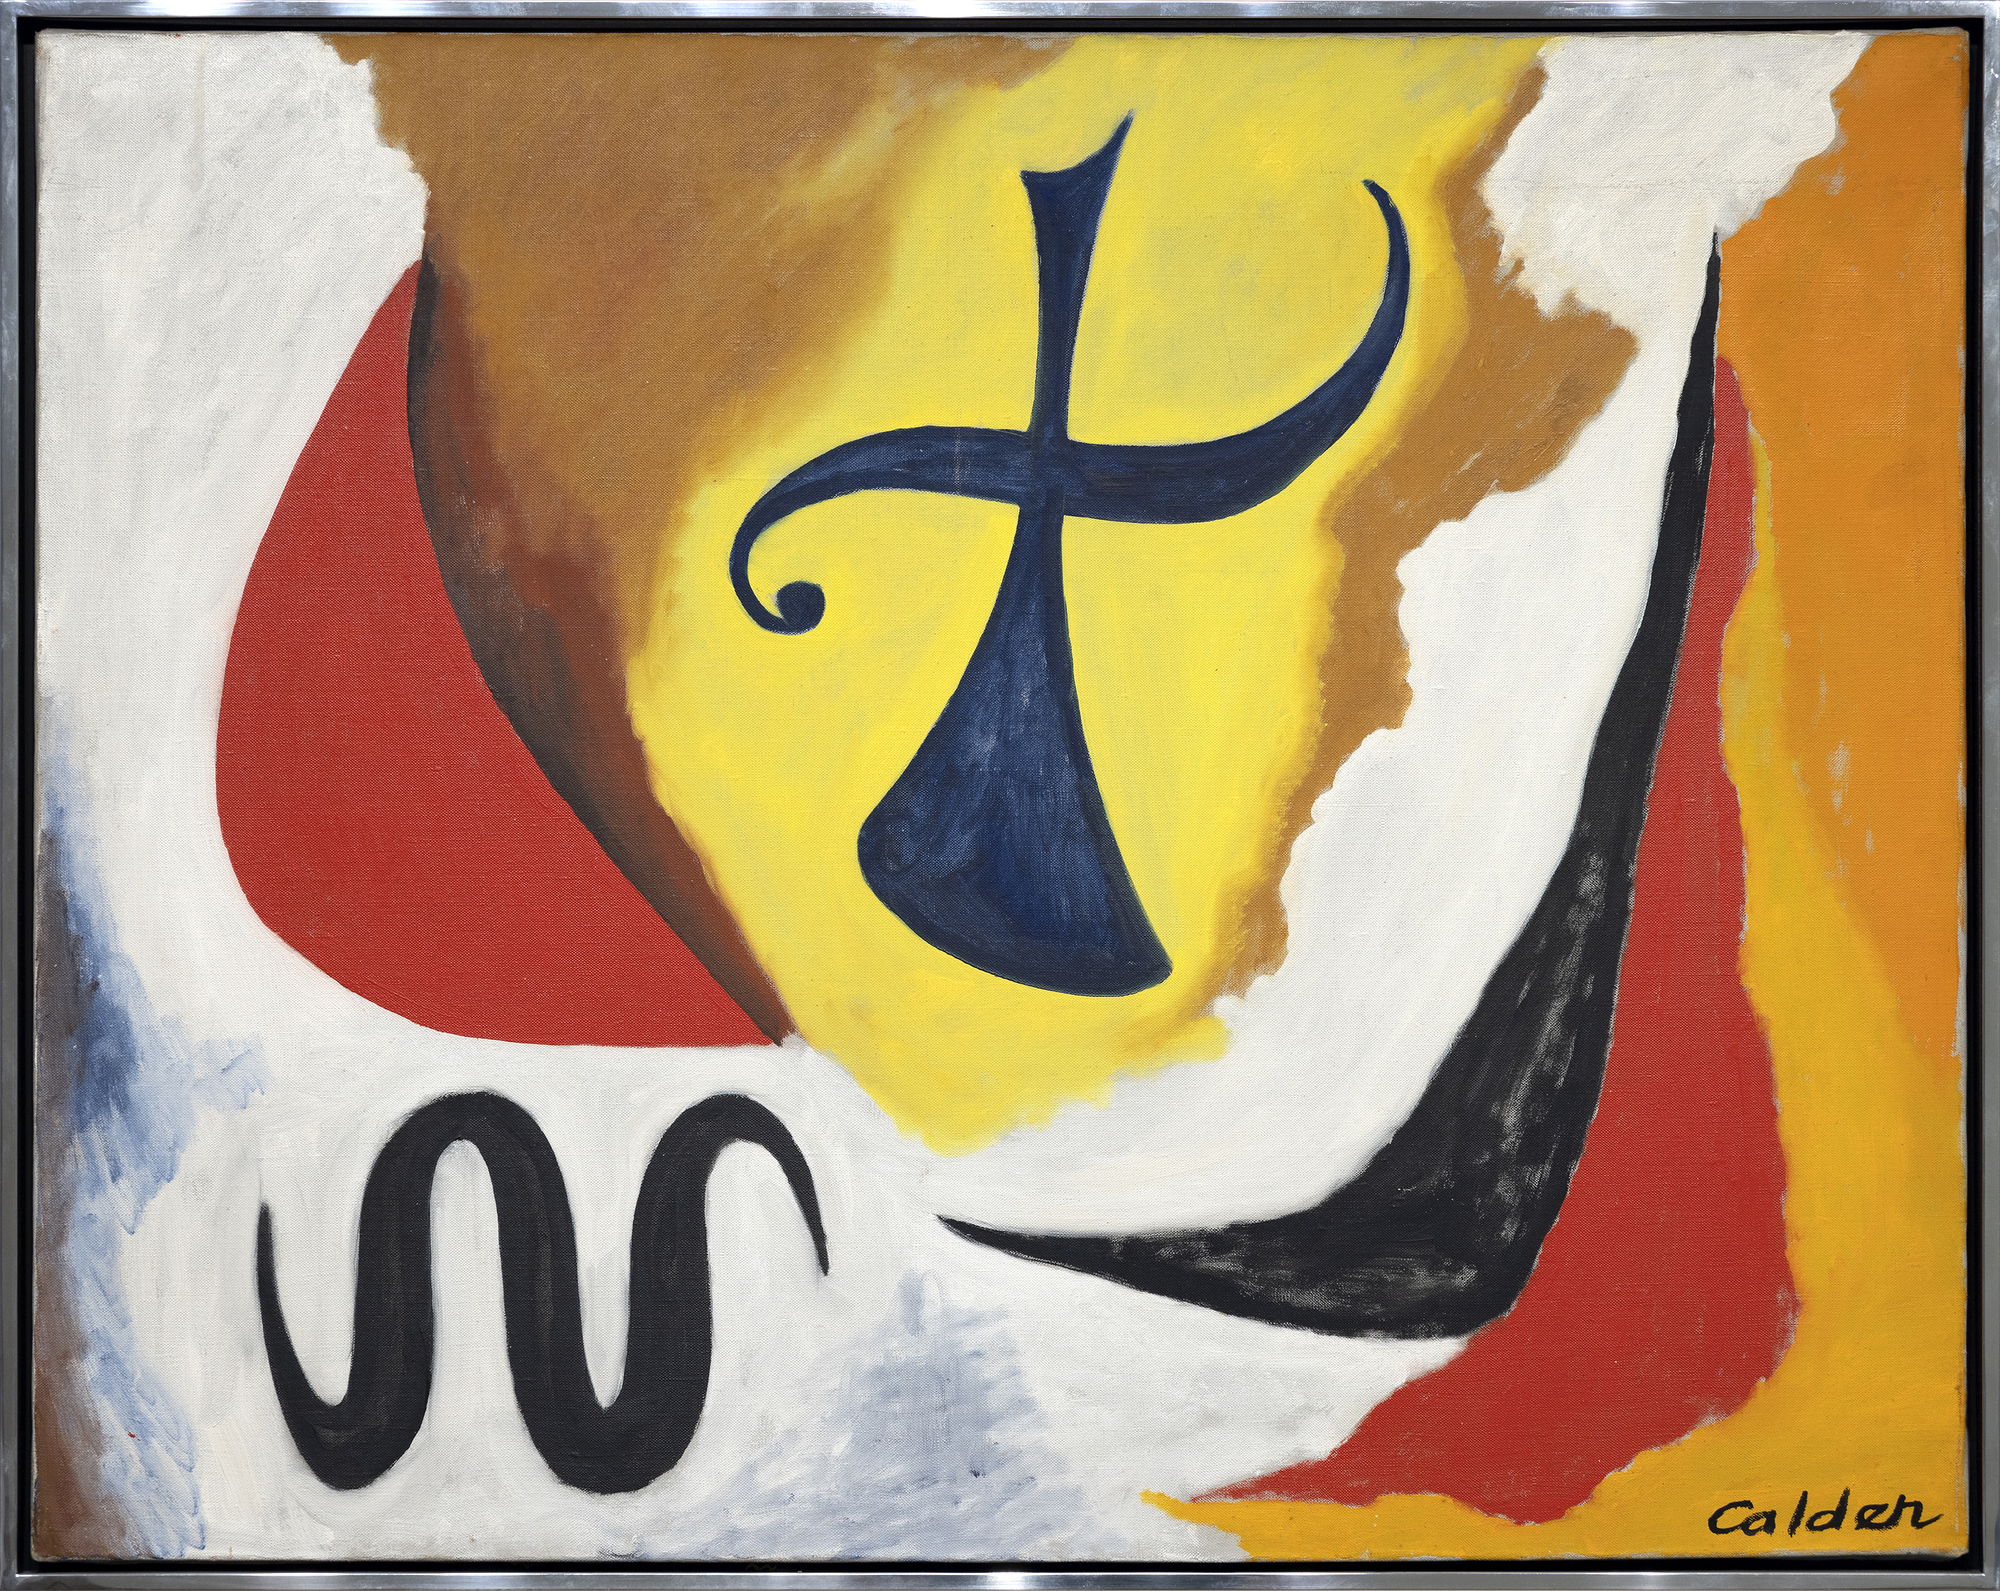 Alexander Calder executed a surprising number of oil paintings during the second half of the 1940s and early 1950s. By this time, the shock of his 1930 visit to Mondrian’s studio, where he was impressed not by the paintings but by the environment, had developed into an artistic language of Calder’s own. So, as Calder was painting The Cross in 1948, he was already on the cusp of international recognition and on his way to winning the XX VI Venice Biennale’s grand prize for sculpture in 1952. Working on his paintings in concert with his sculptural practice, Calder approached both mediums with the same formal language and mastery of shape and color.&lt;br&gt;&lt;br&gt;Calder was deeply intrigued by the unseen forces that keep objects in motion. Taking this interest from sculpture to canvas, we see that Calder built a sense of torque within The Cross by shifting its planes and balance. Using these elements, he created implied motion suggesting that the figure is pressing forward or even descending from the skies above. The Cross’s determined momentum is further amplified by details such as the subject’s emphatically outstretched arms, the fist-like curlicue vector on the left, and the silhouetted serpentine figure.&lt;br&gt;&lt;br&gt;Calder also adopts a strong thread of poetic abandon throughout The Cross’s surface. It resonates with his good friend Miró’s hieratic and distinctly personal visual language, but it is all Calder in the effective animation of this painting’s various elements. No artist has earned more poetic license than Calder, and throughout his career, the artist remained convivially flexible in his understanding of form and composition. He even welcomed the myriad interpretations of others, writing in 1951, “That others grasp what I have in mind seems unessential, at least as long as they have something else in theirs.”&lt;br&gt;&lt;br&gt;Either way, it is important to remember that The Cross was painted shortly after the upheaval of the Second World War and to some appears to be a sobering reflection of the time. Most of all, The Cross proves that Alexander Calder loaded his brush first to work out ideas about form, structure, relationships in space, and most importantly, movement.